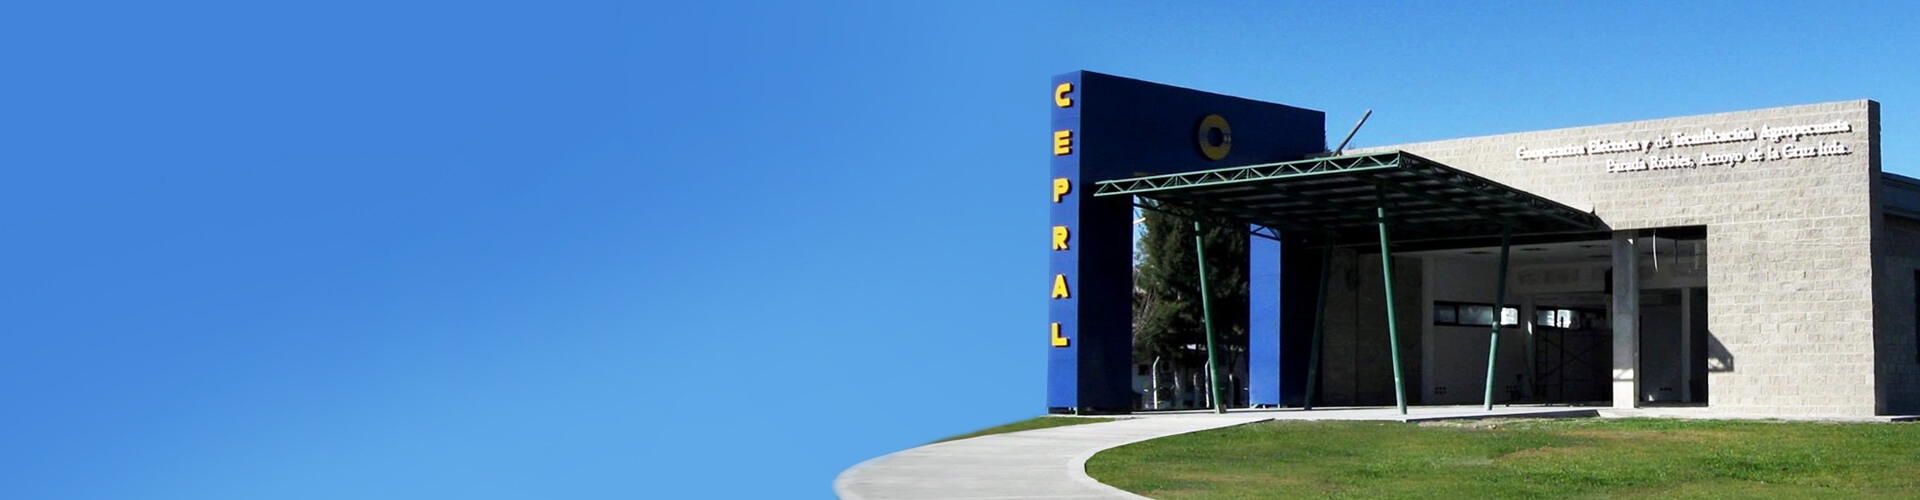 cepral-customer-story-homepage-banner_1920x500